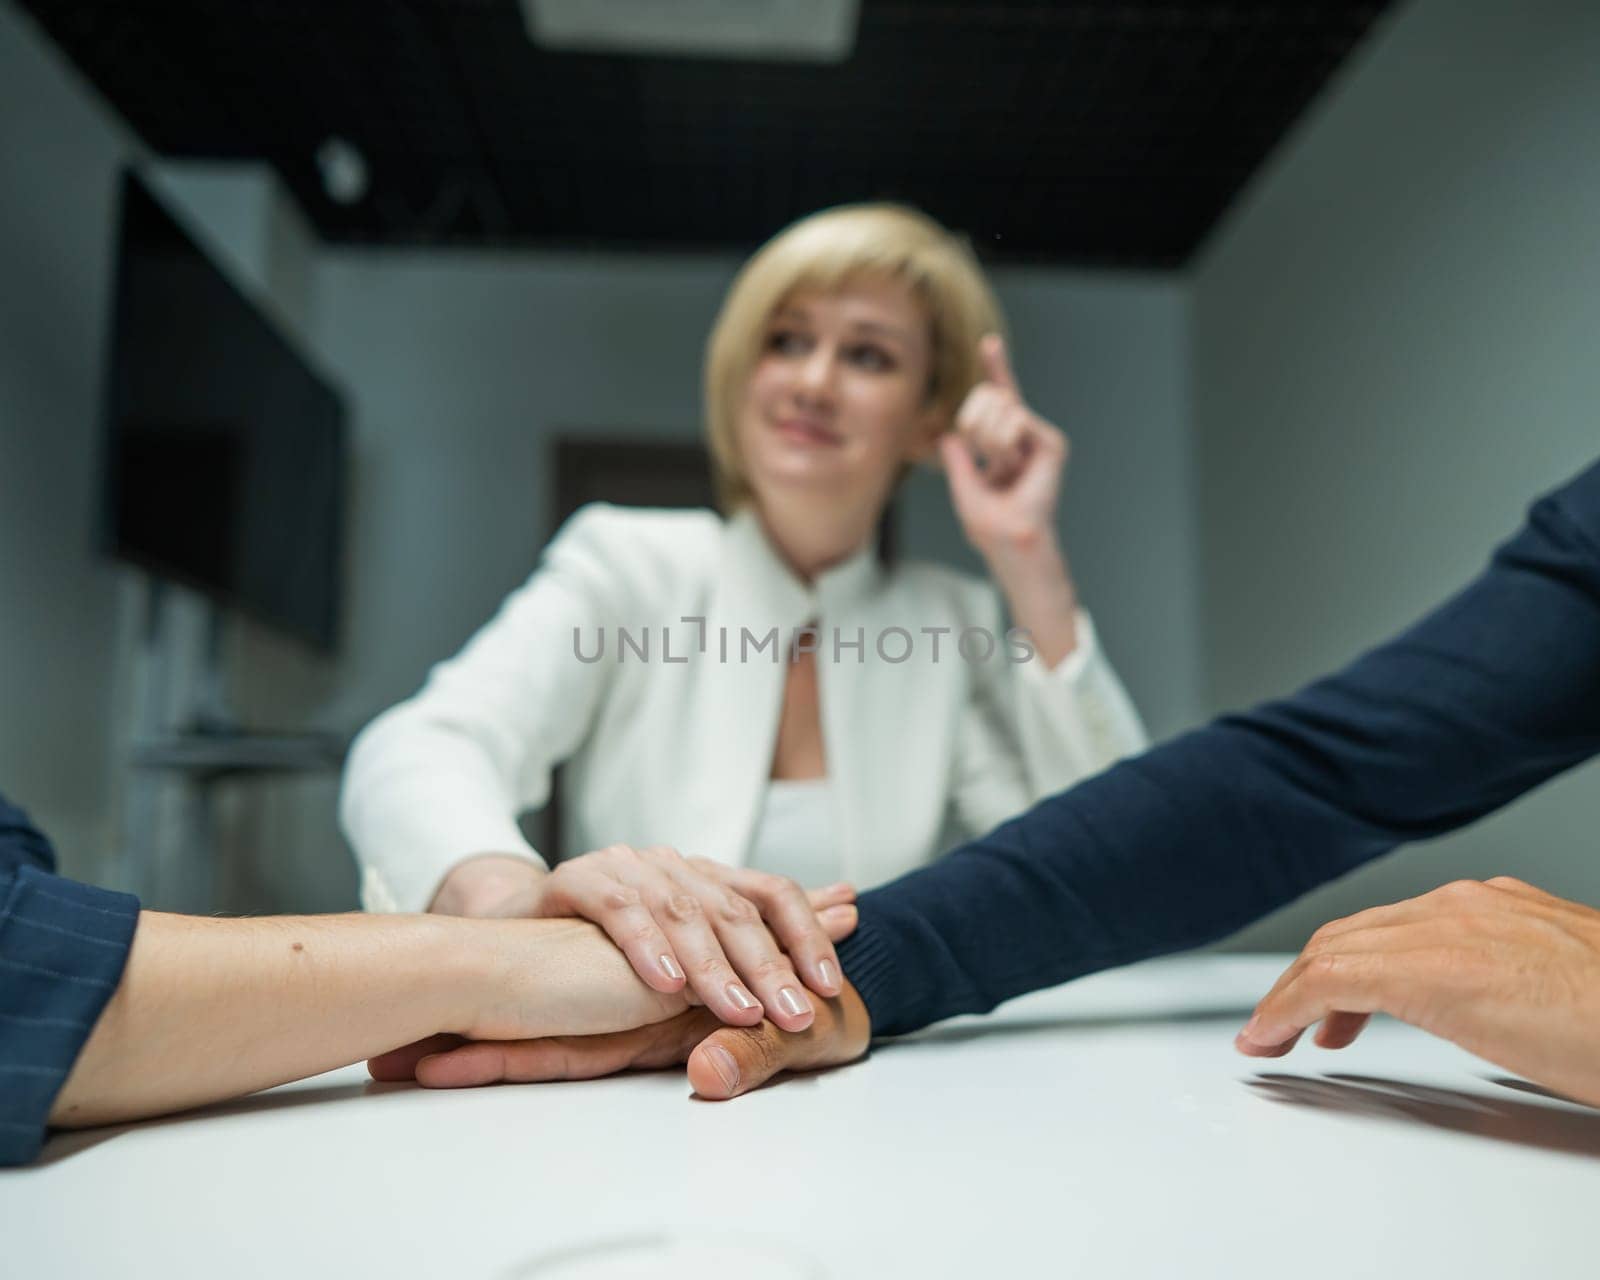 Blond, red-haired woman and bearded man dressed in suits in the office. Business people shake hands making a deal in a conference room. by mrwed54